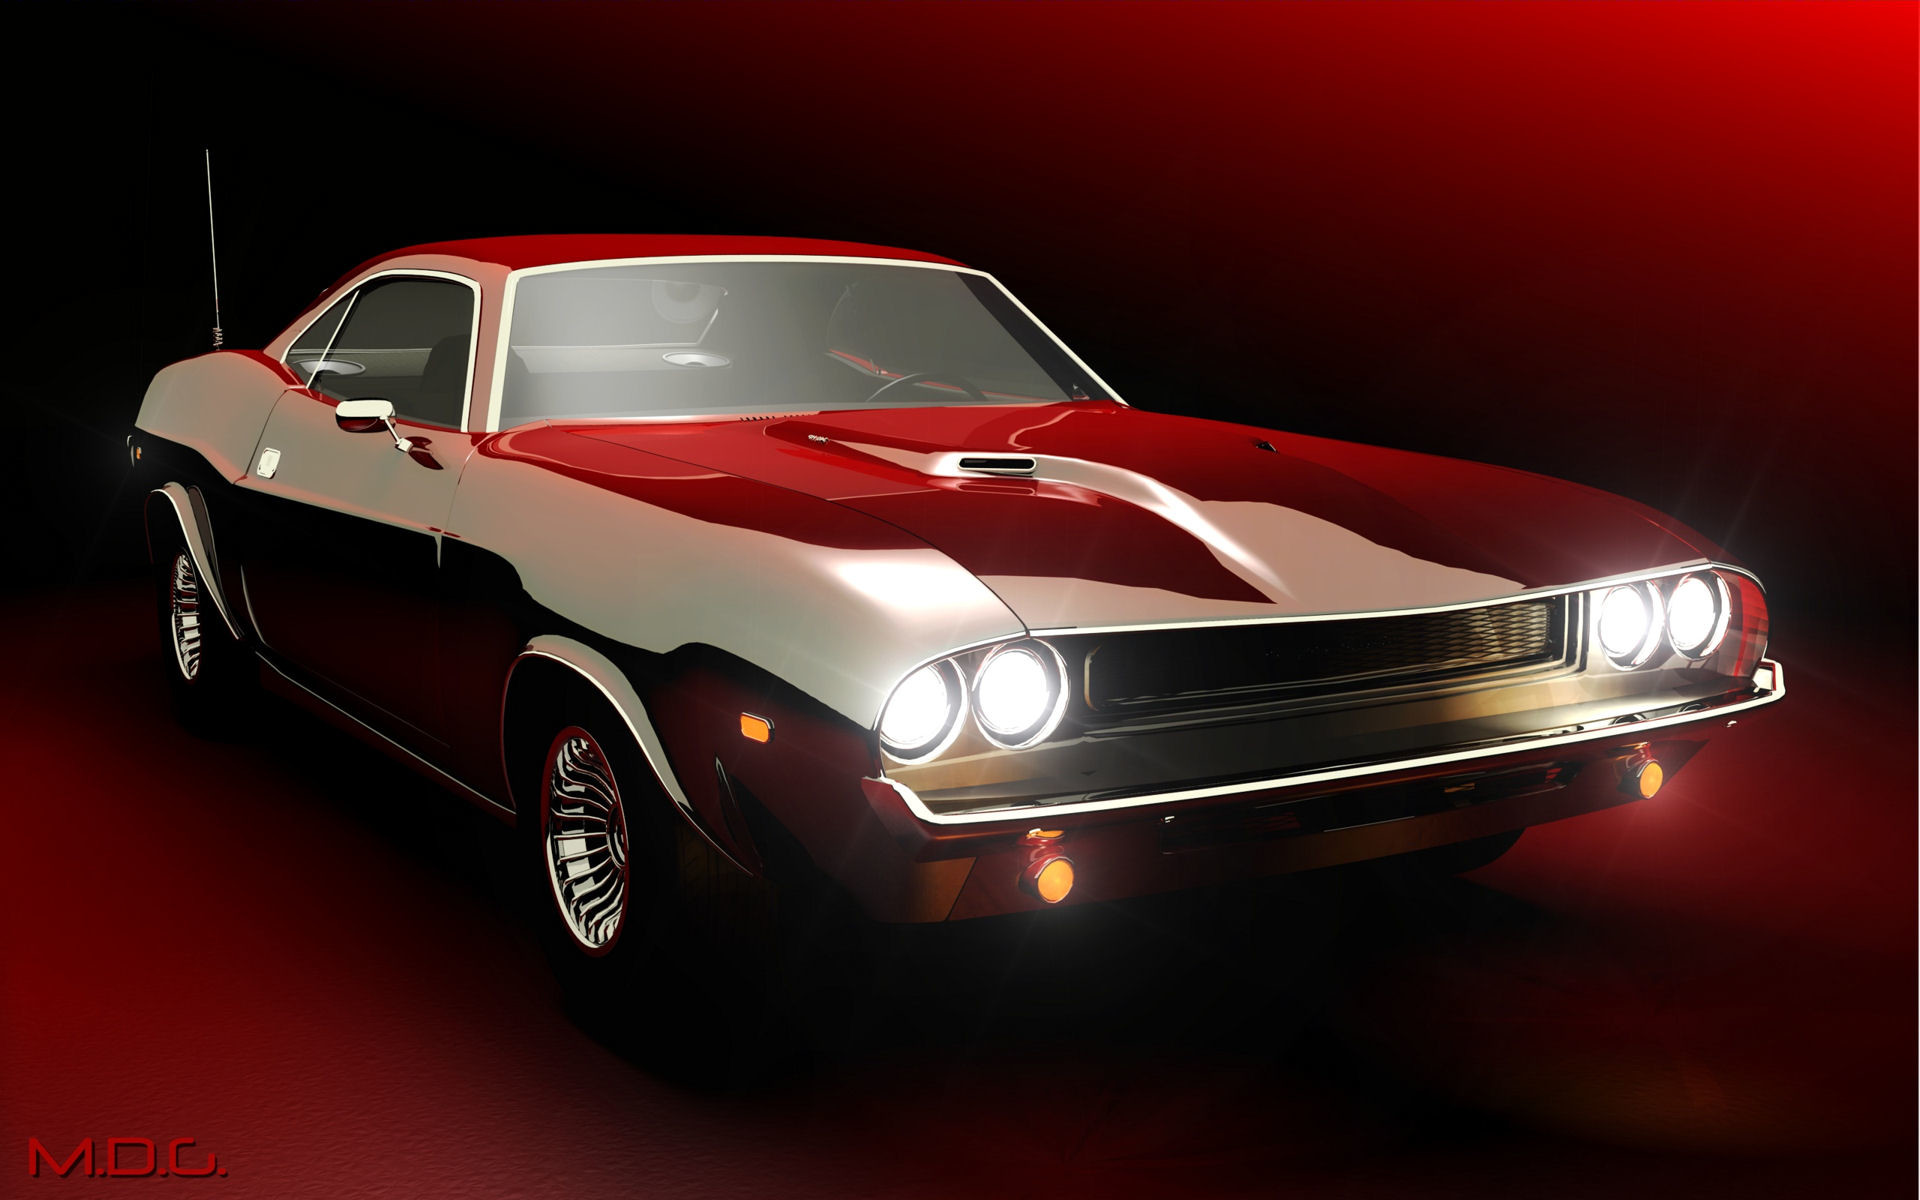 1920x1200 muscle cars - Bing Images